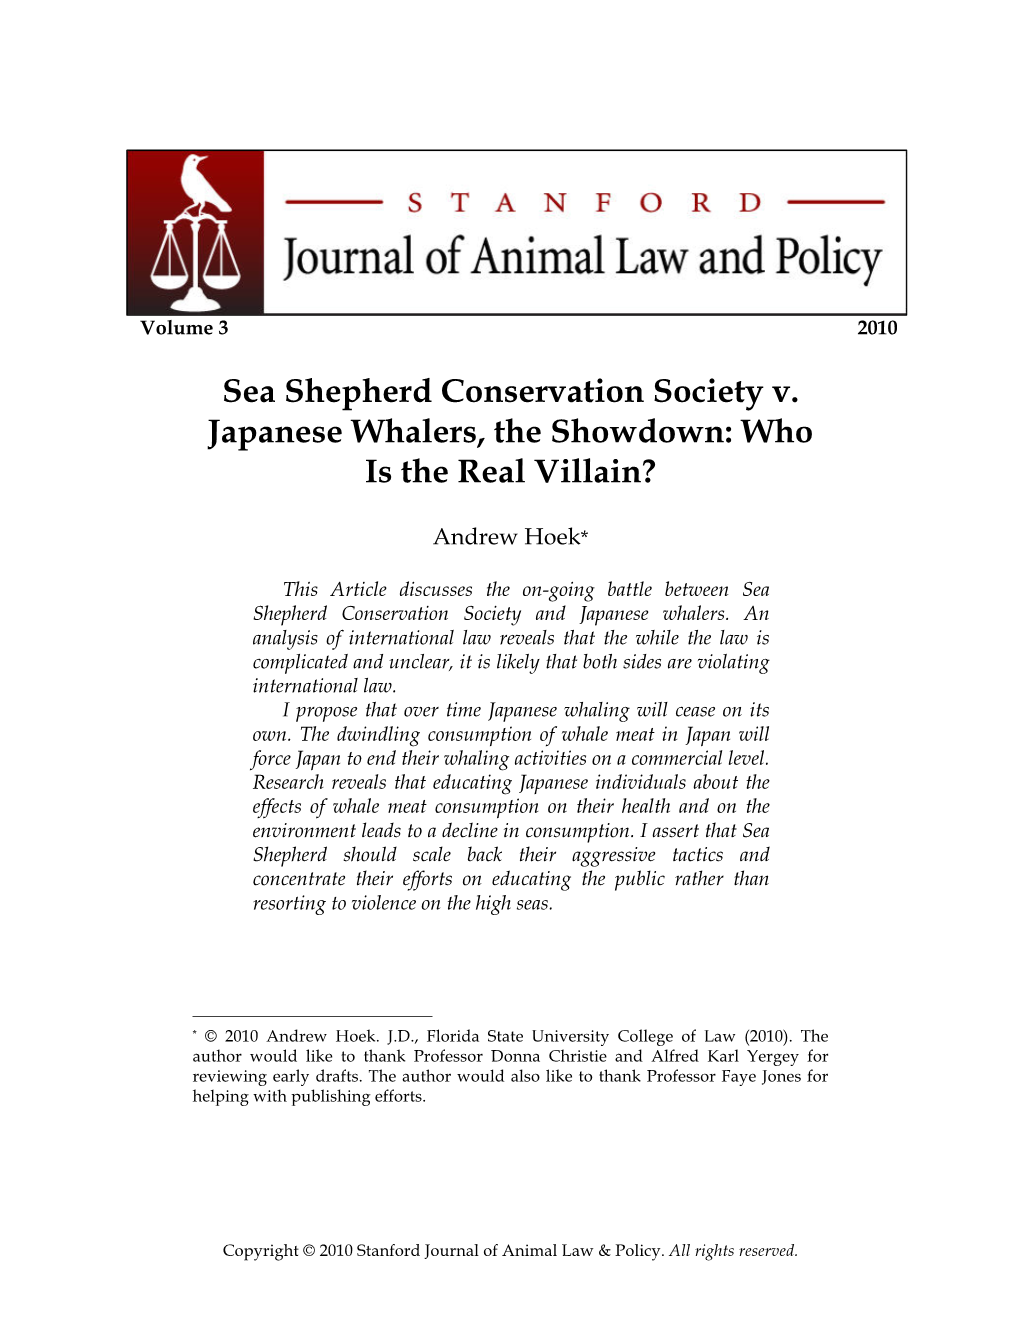 Sea Shepherd Conservation Society V. Japanese Whalers, the Showdown: Who Is the Real Villain?